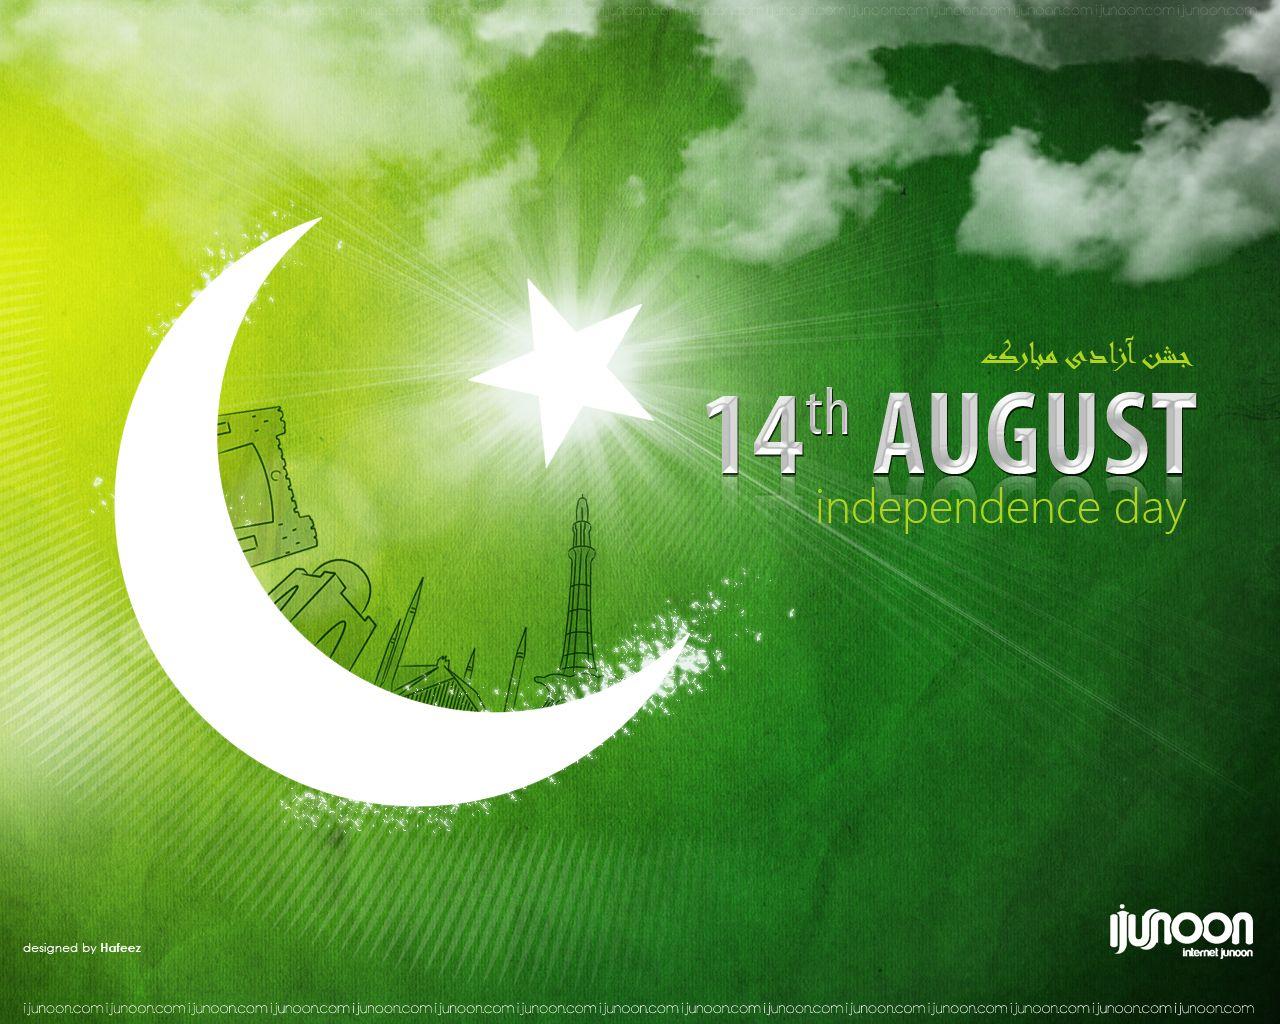 14th August independence day Wallpaper